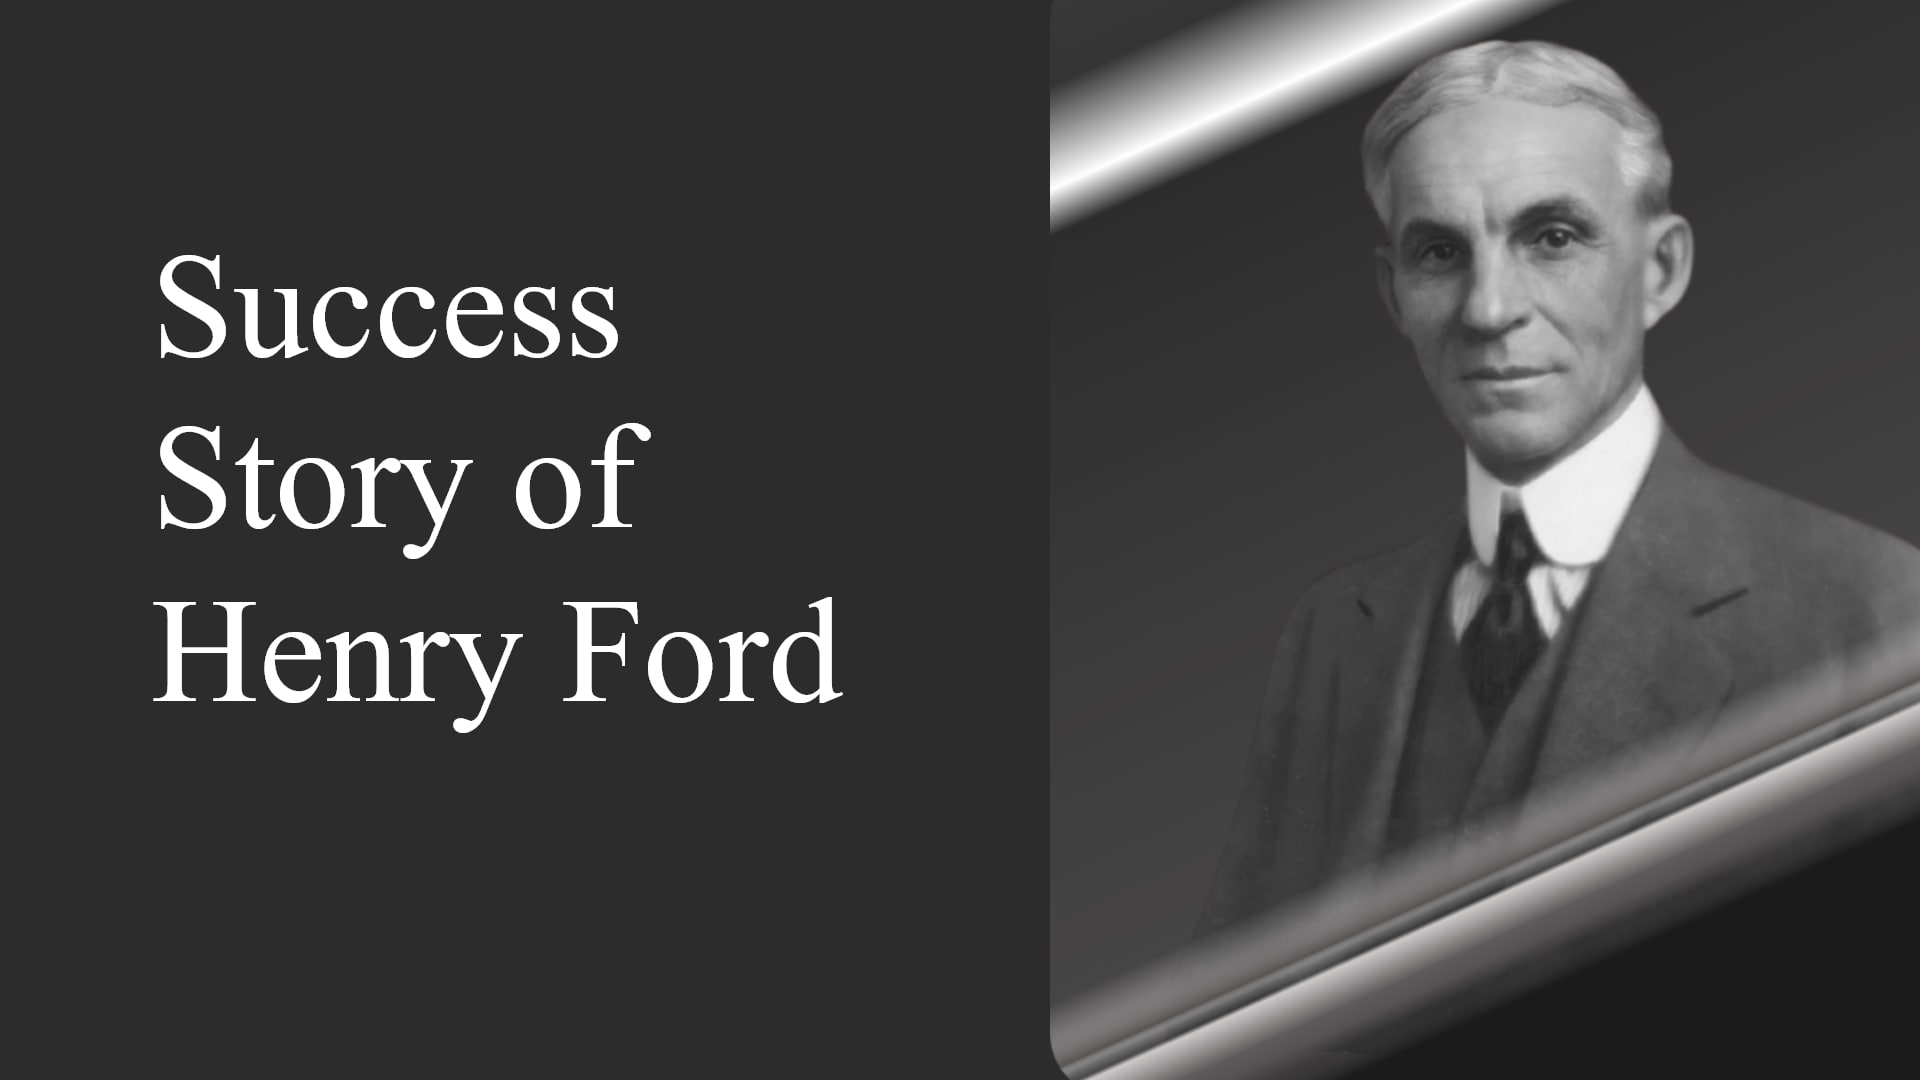 Henry ford Success Story 